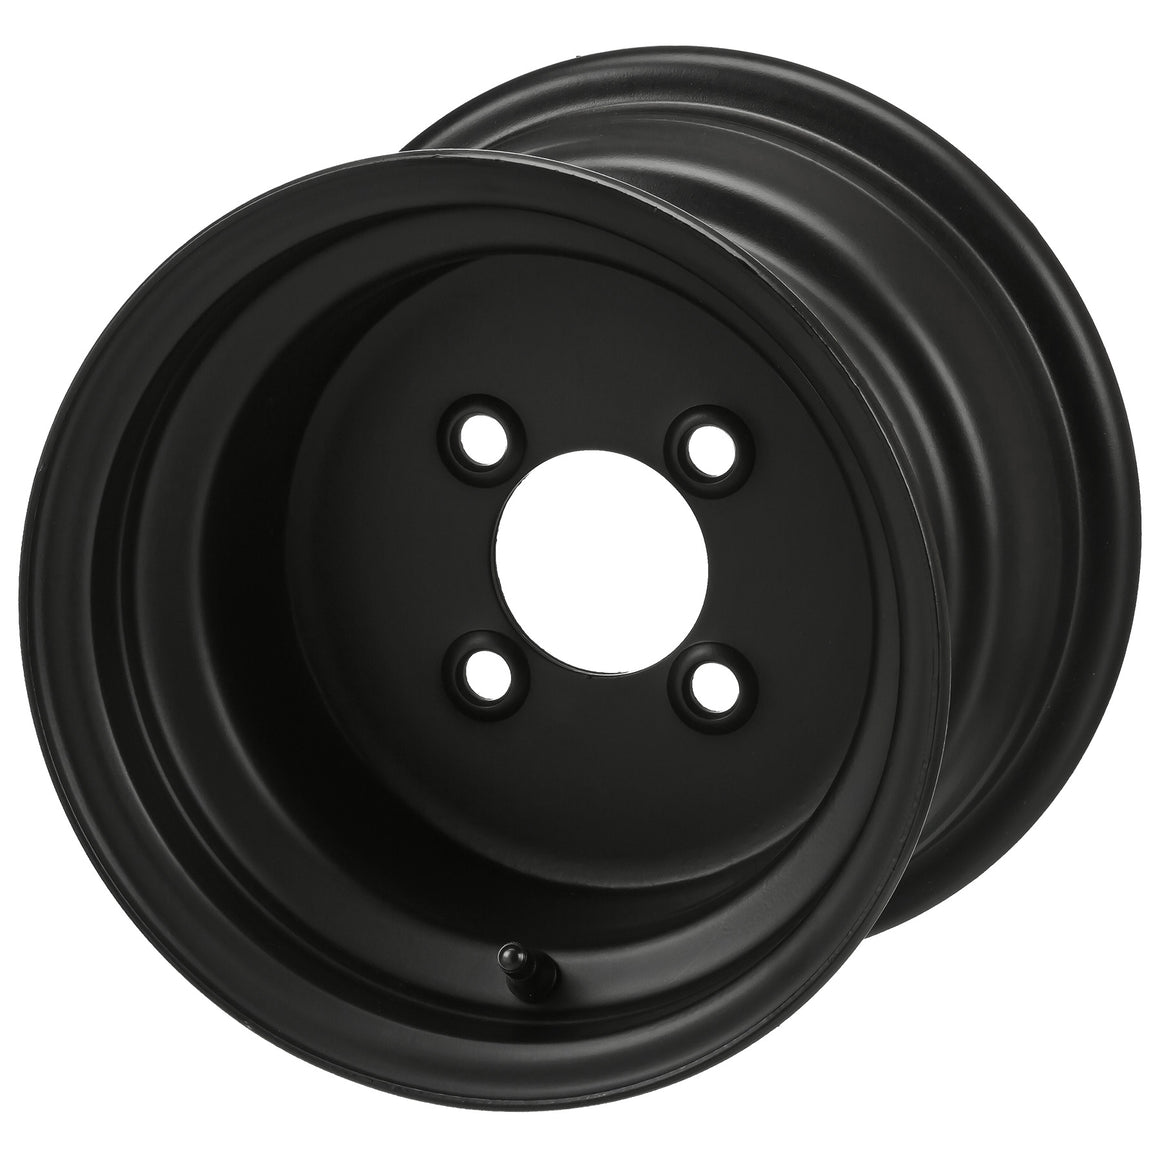 10" Offset Steel Wheels on Black Trail Tires Combo